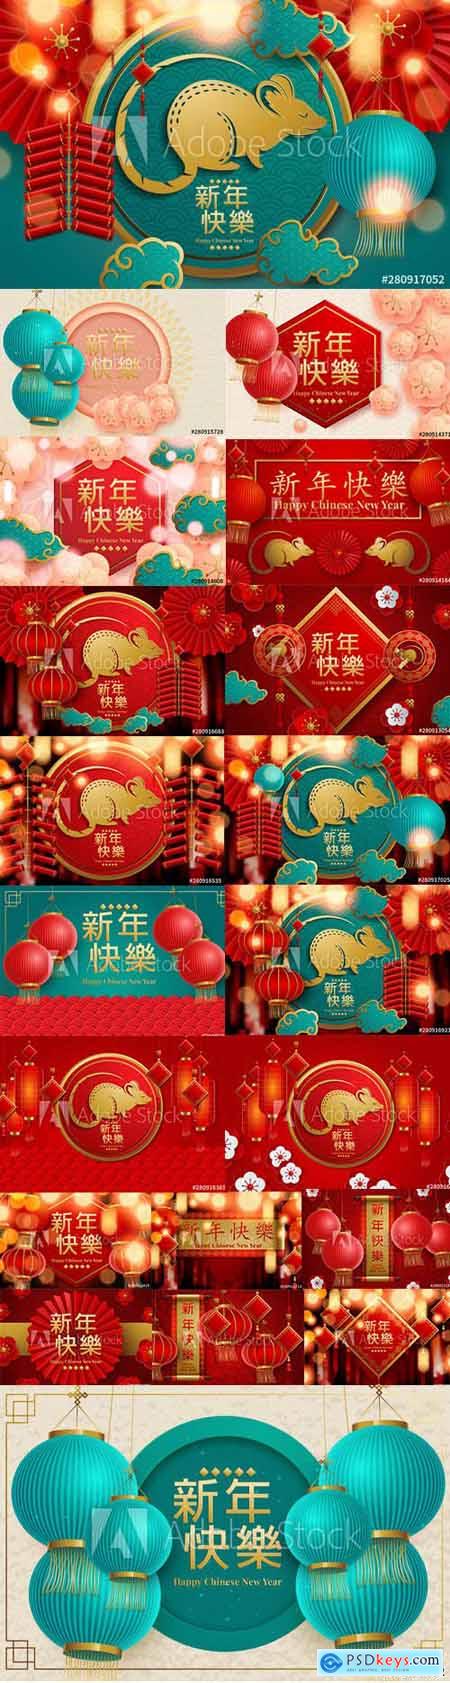 Set of Chinese New Year 2020 Web Banner and Illustration